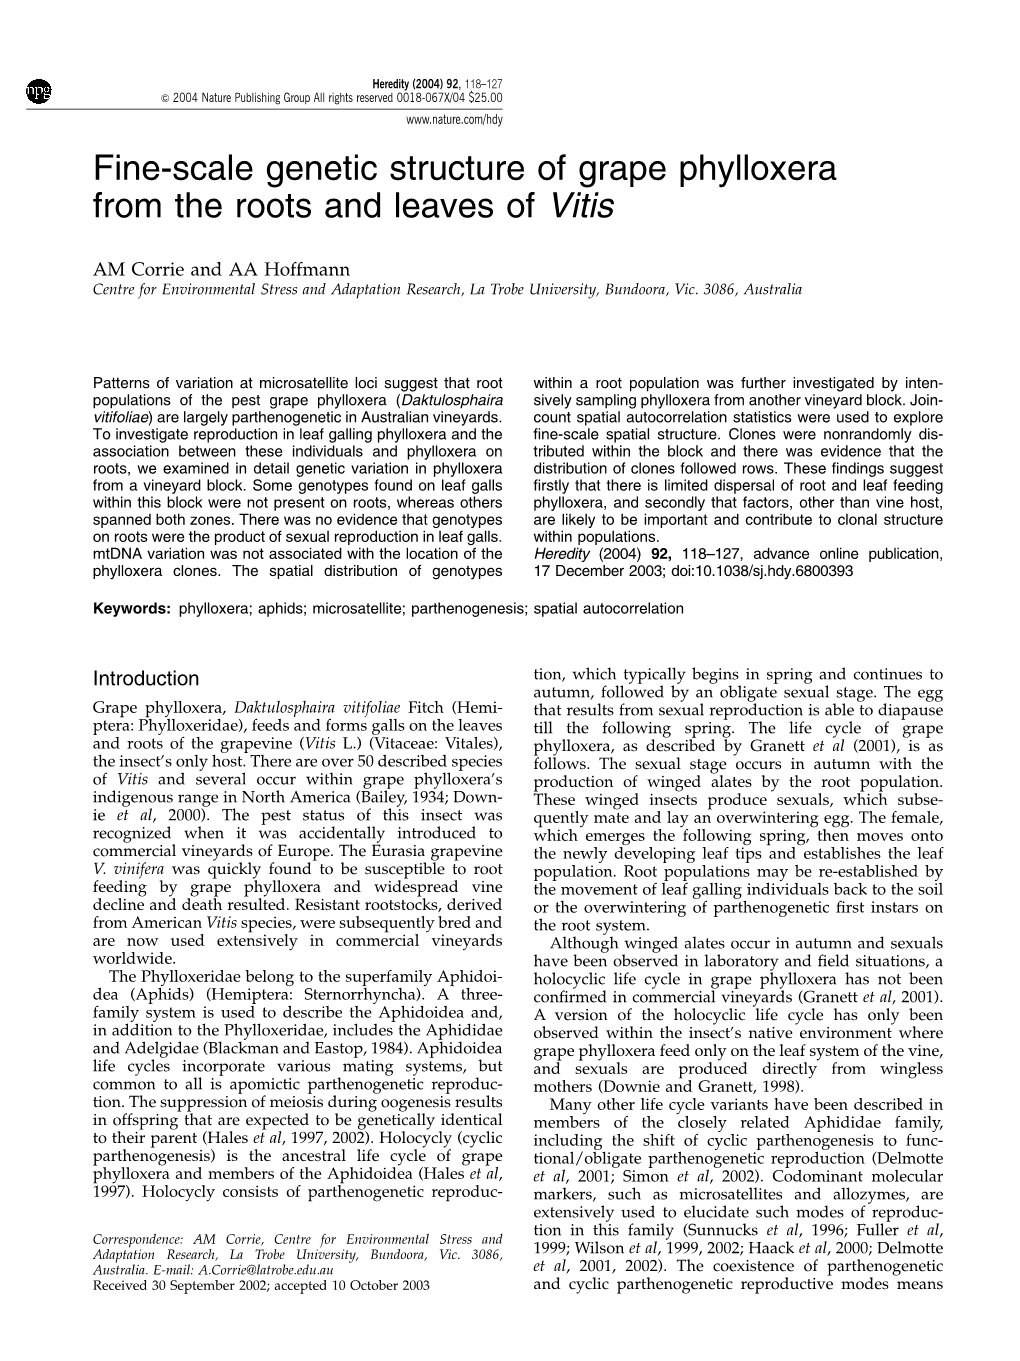 Fine-Scale Genetic Structure of Grape Phylloxera from the Roots and Leaves of Vitis